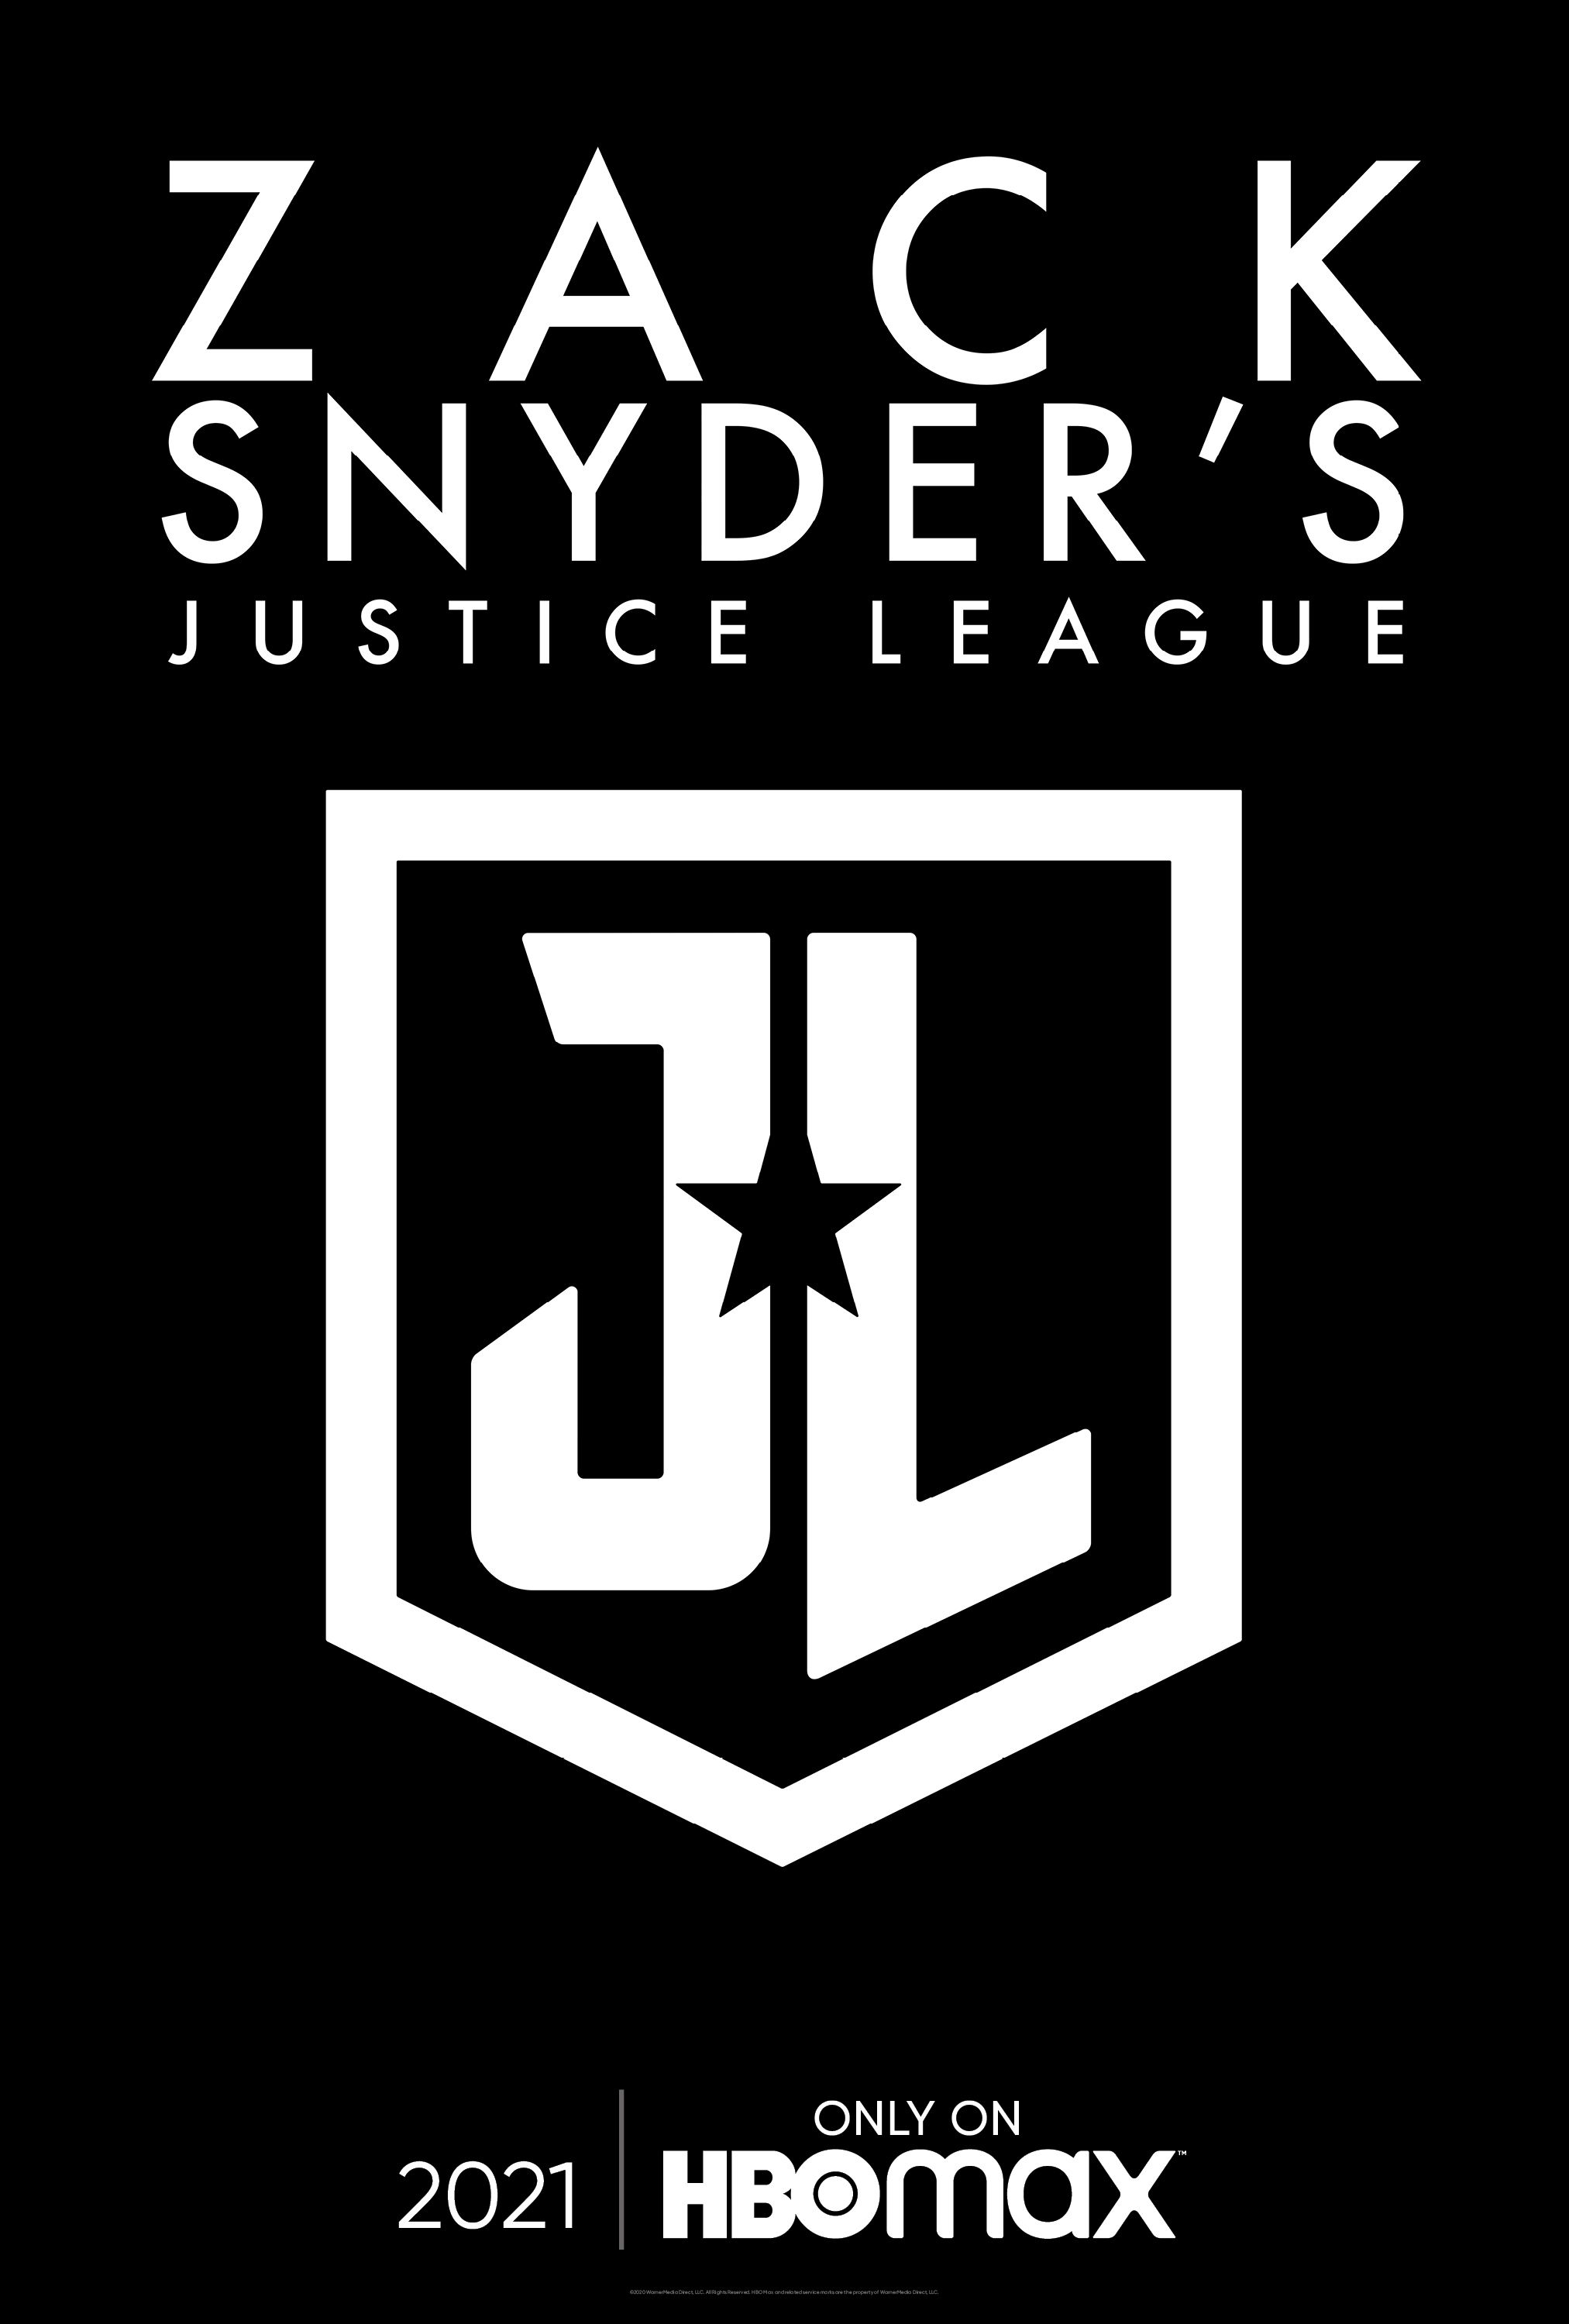 Zack Snyder's Justice League .whereyouwatch.com